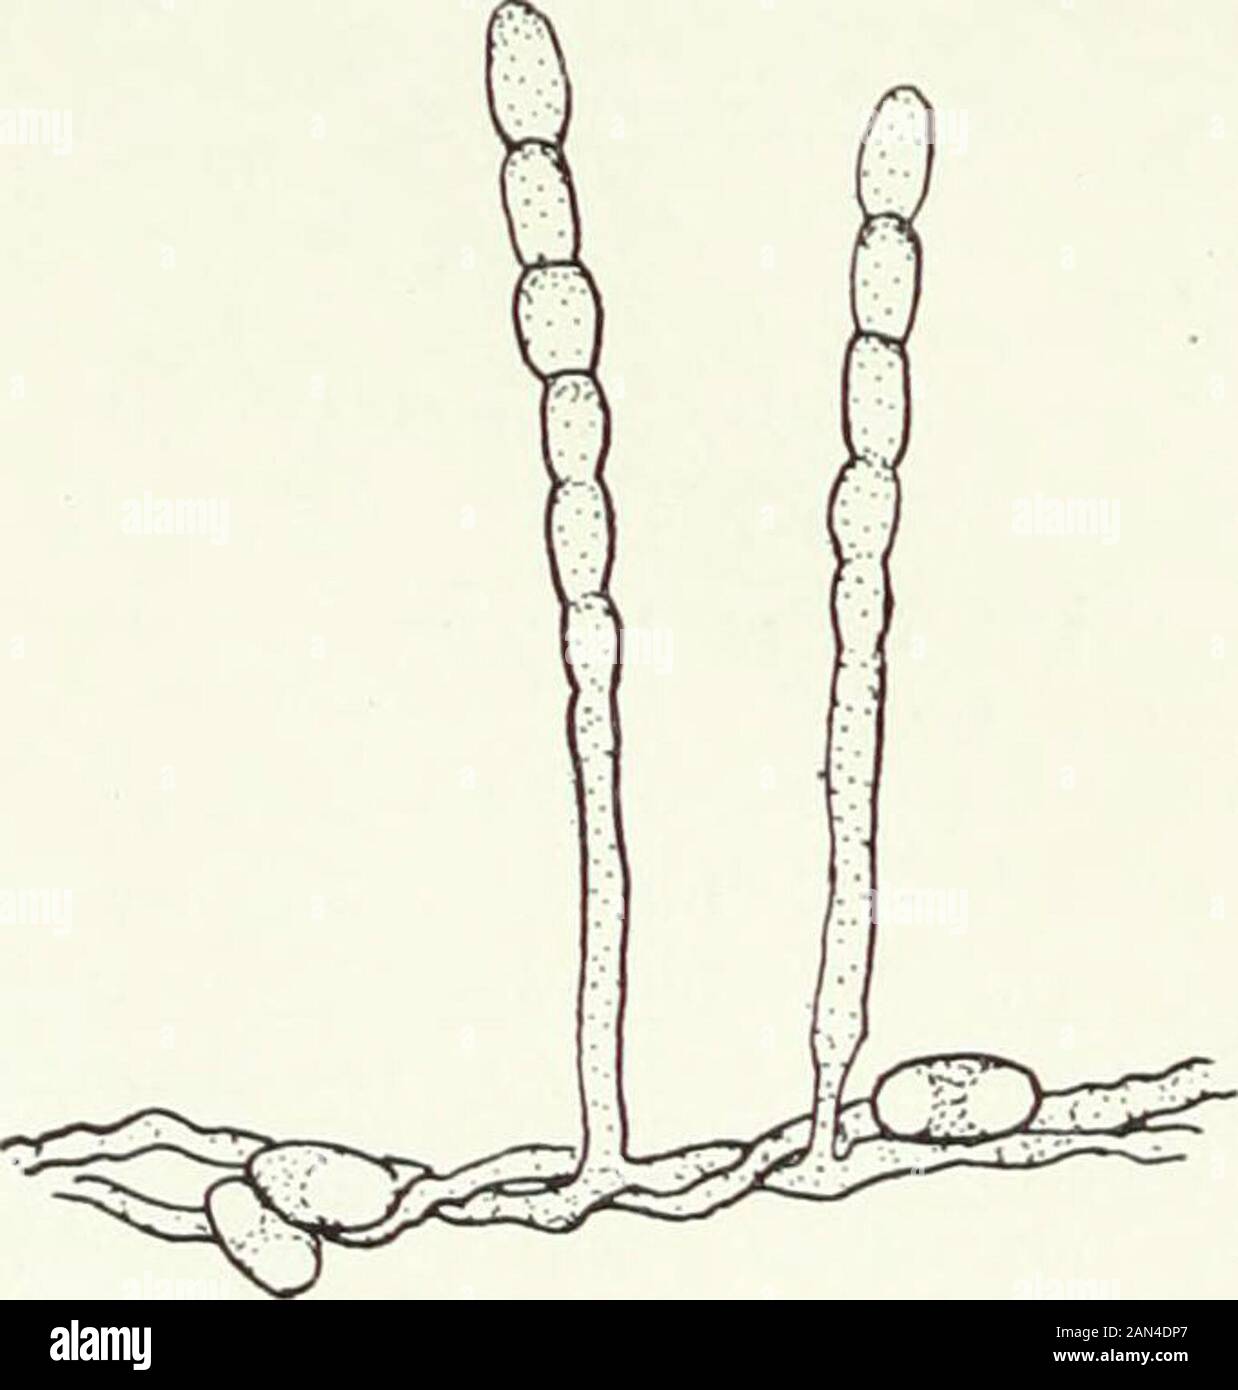 Fungi, Ascomycetes, Ustilaginales, Uredinales . ofconsiderable thickness. The Erysiphaceae are propagated during the summer by rather largeoval uninucleate conidia (fig. 38). These are ordinarily produced in rows on simple conidiophores with one ormore basal cells. In the endophyticE. taurica, however, the conidia areborne singly on branched conidio-phores which emerge through thestomata of the host. In the case ofPhyllactinia Cory-lea, which is met with on a largenumber of deciduous trees, variationsoccur in the shape of the conidiaborne on different hosts, and indicatethe existence of morpho Stock Photo